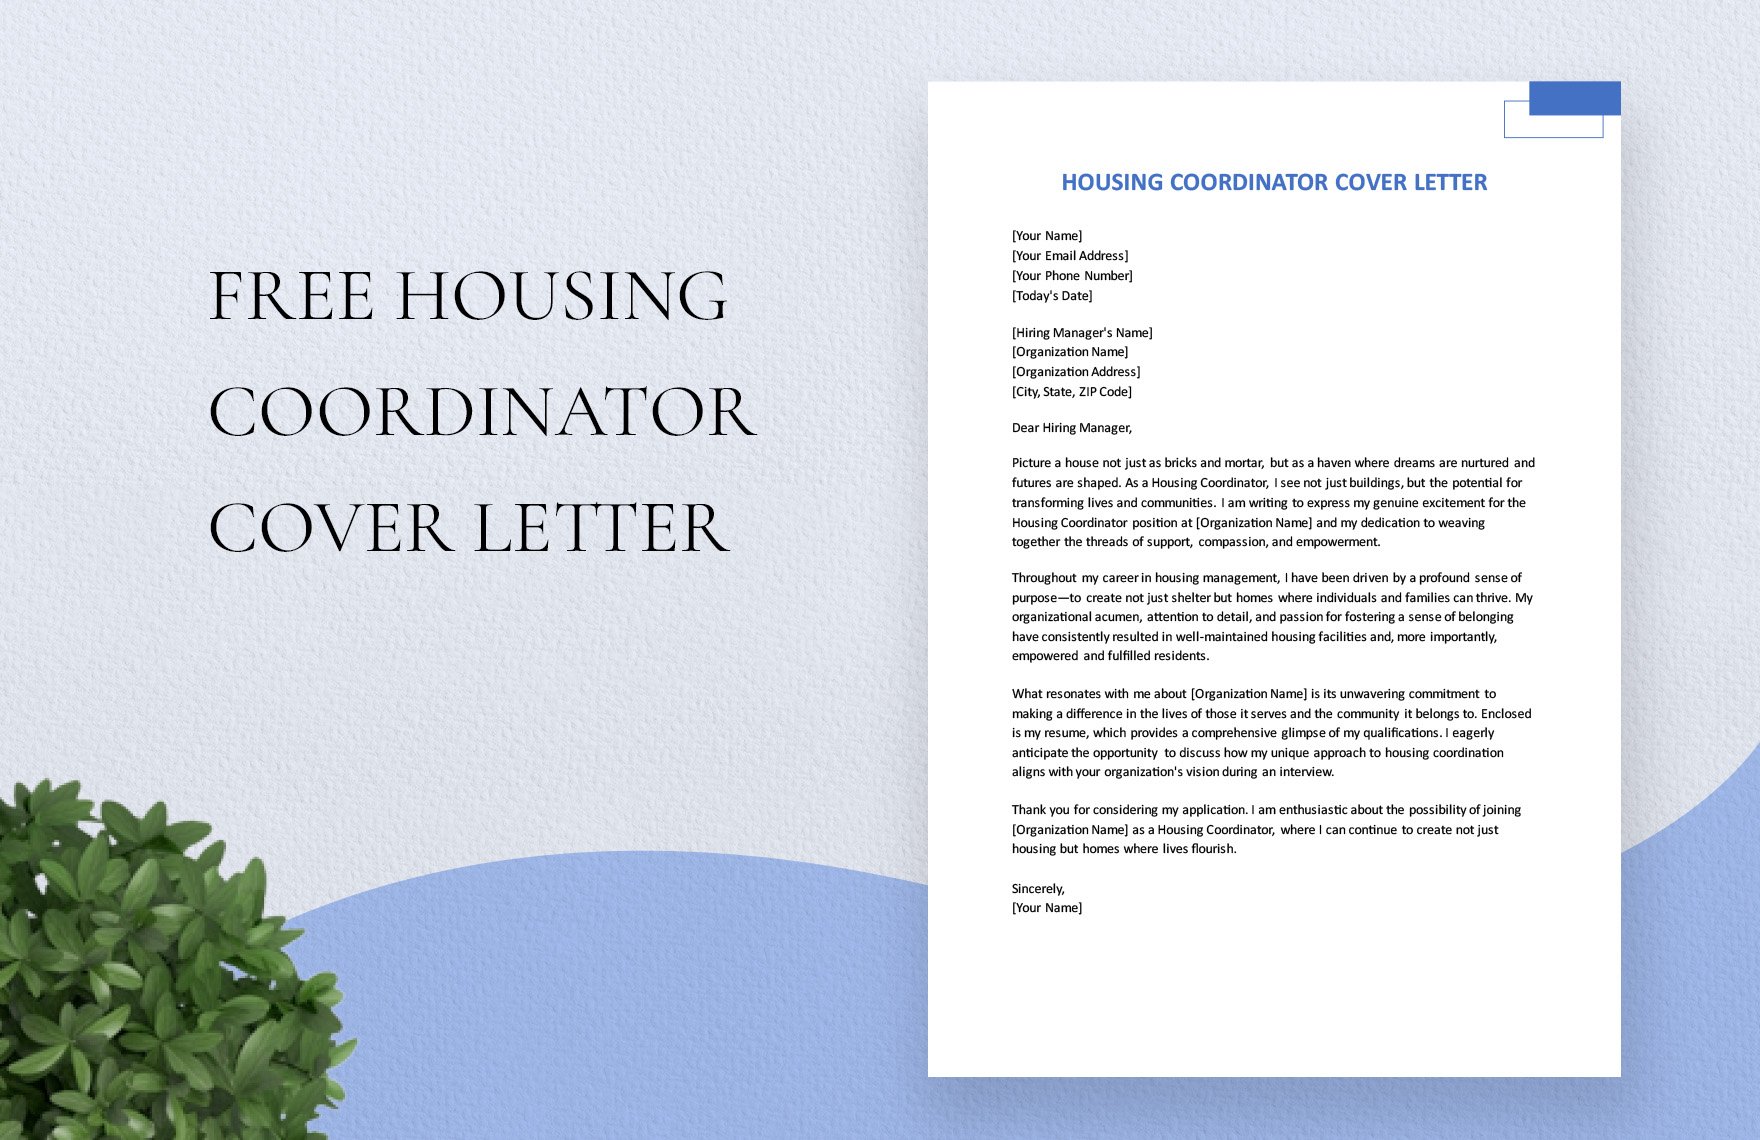 Housing Coordinator Cover Letter in Word, Google Docs, PDF